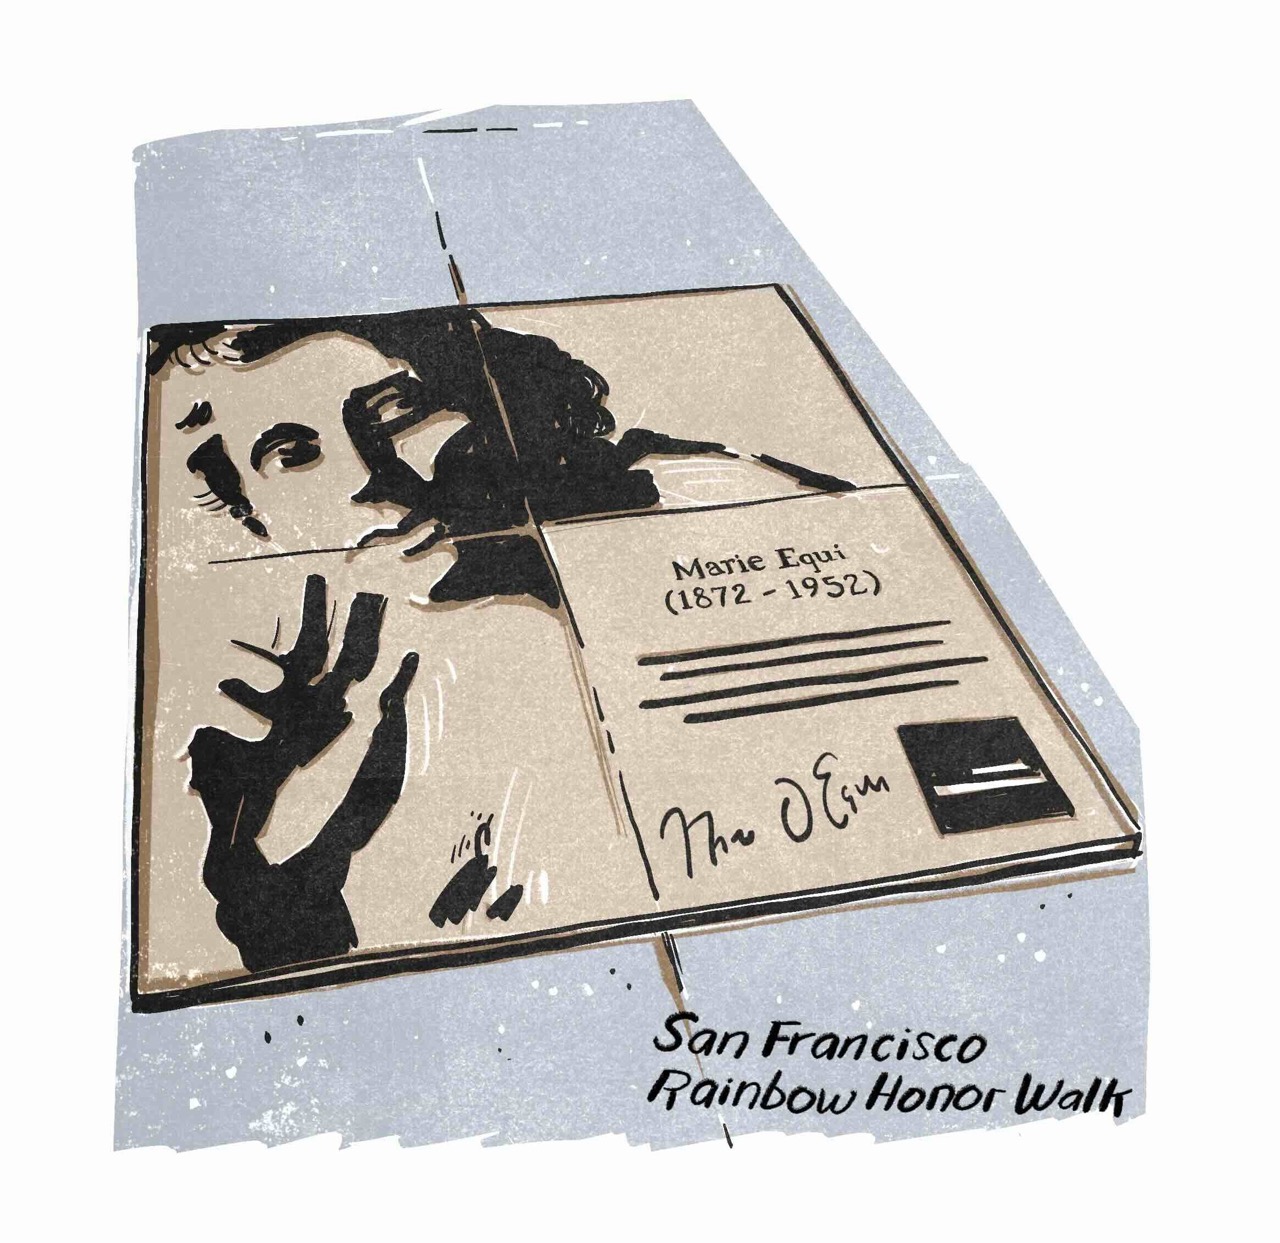 Drawing of Marie Equi's San Fransisco Honor Walk plaque.